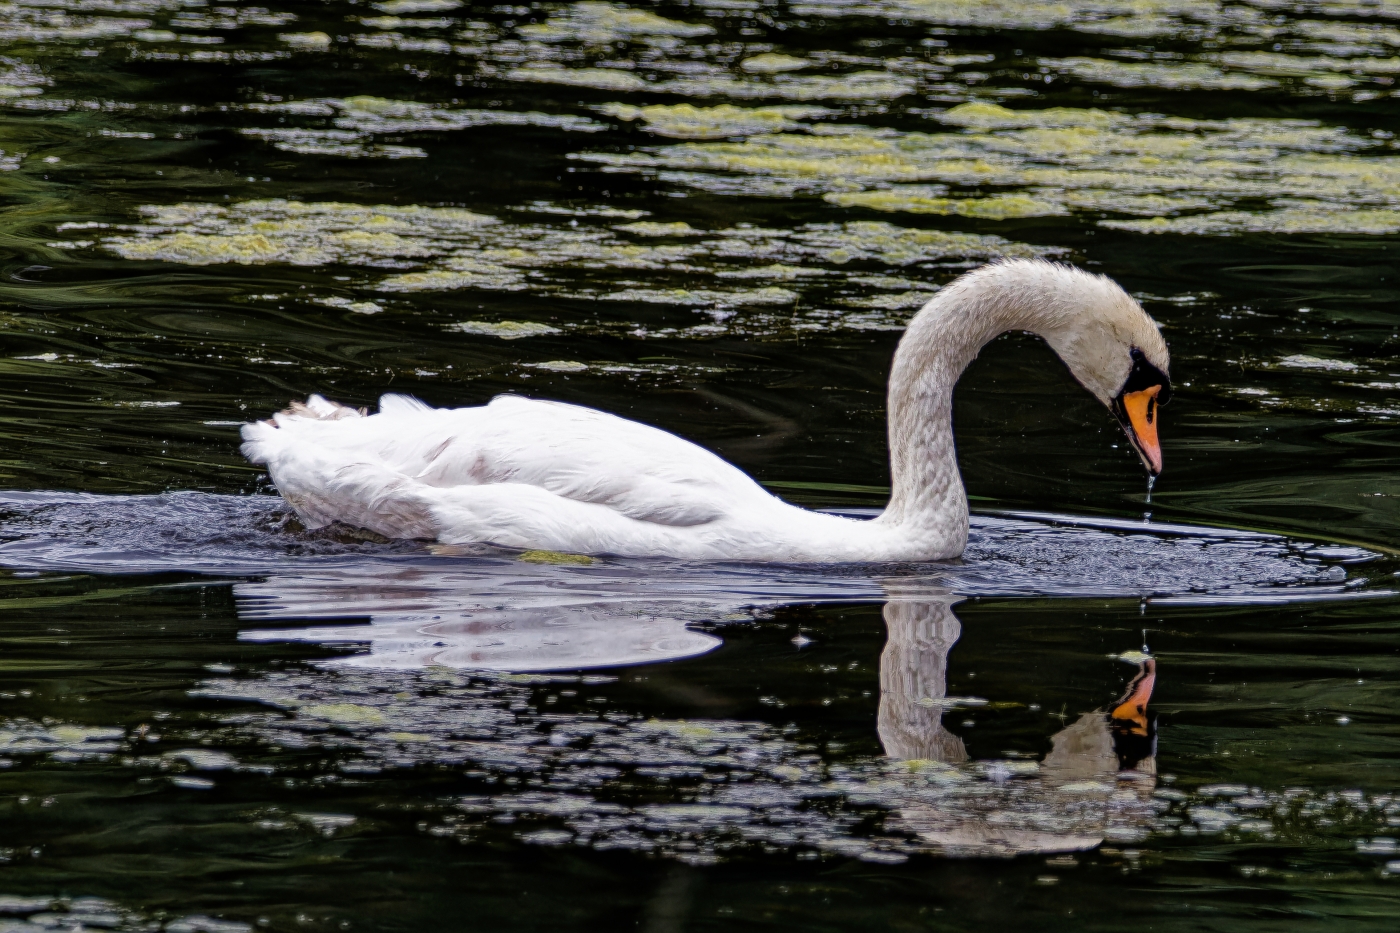 photographer dntphotographs wildlife  photo. mute swan on a lake during summer.